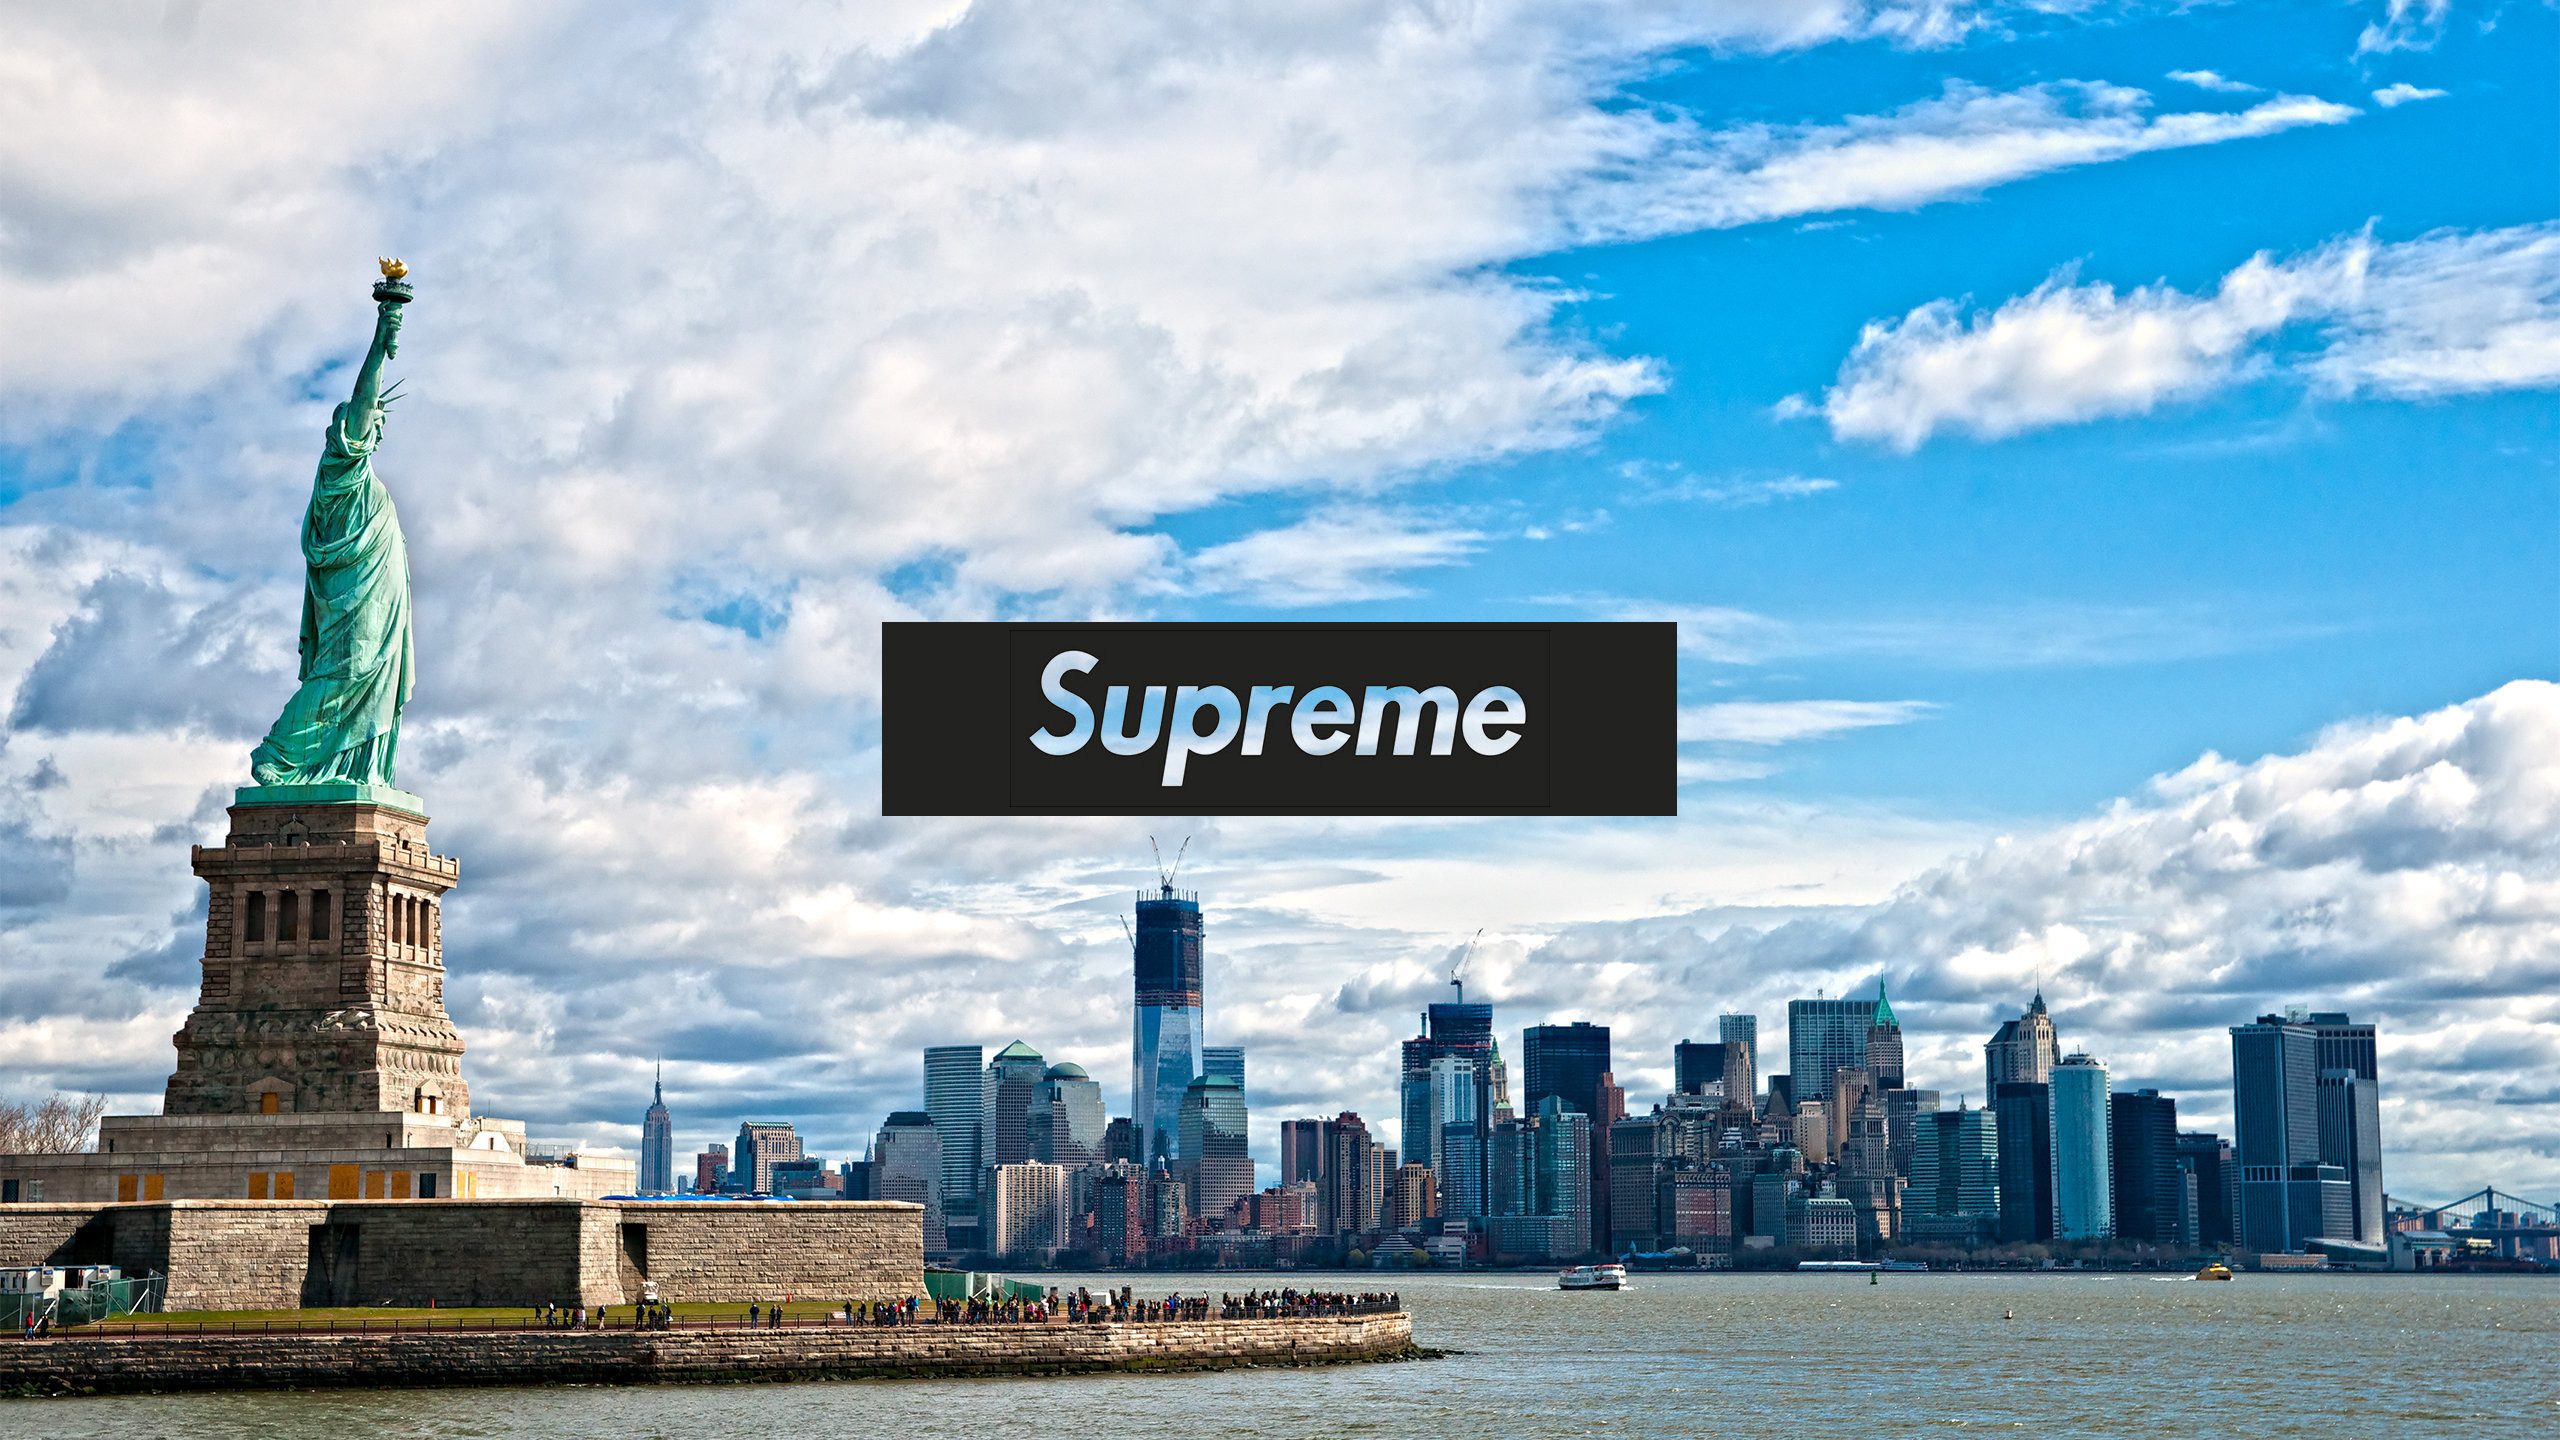 Supreme Wallpaper The Best Image In